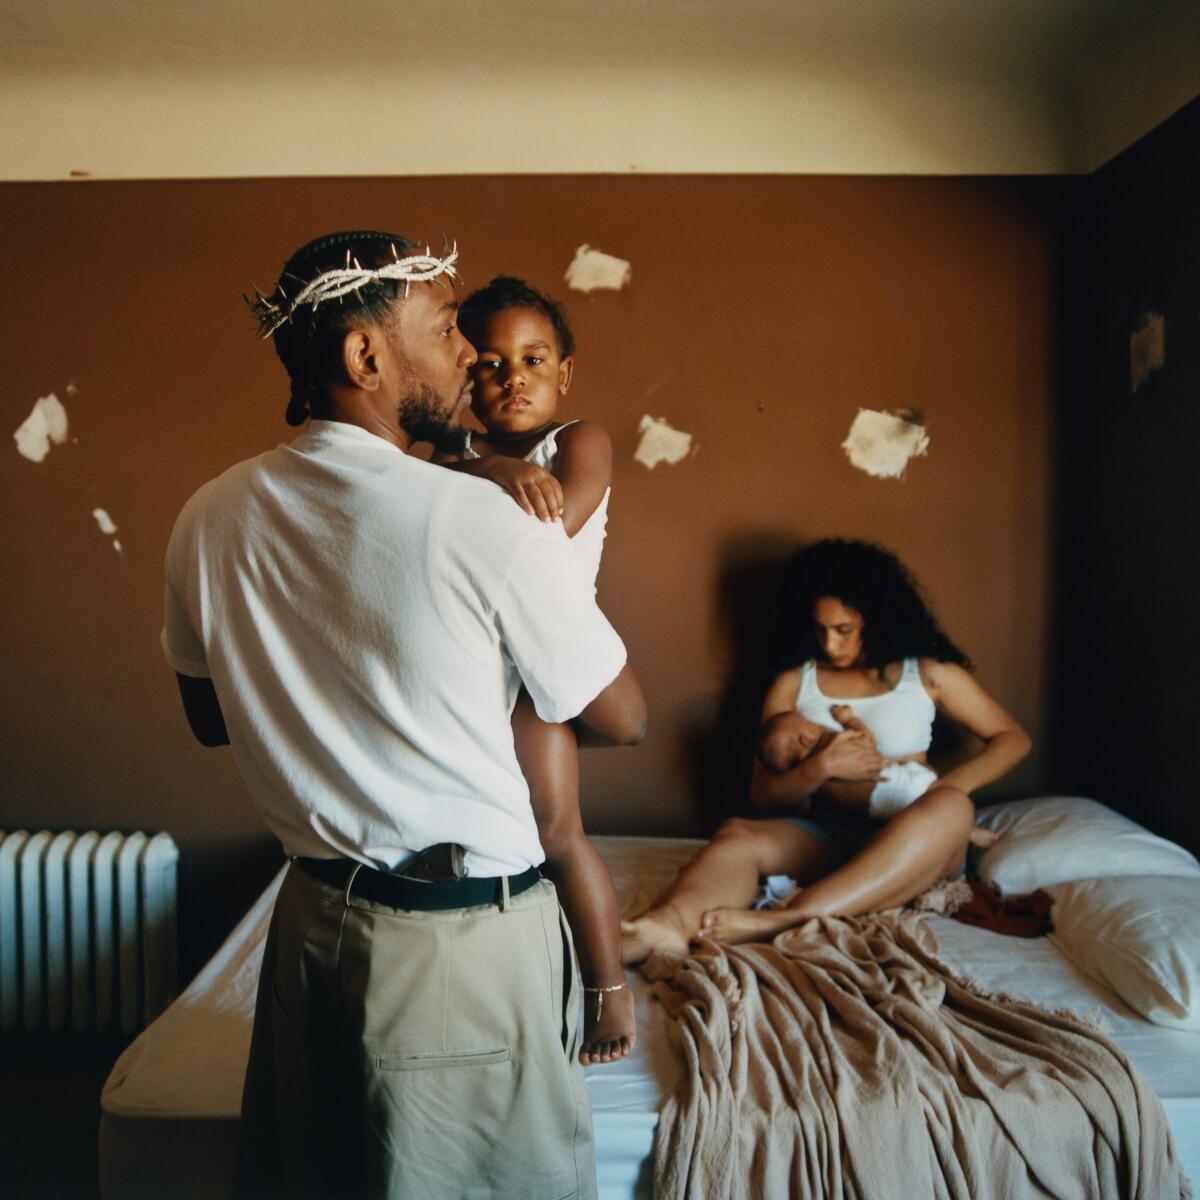 An album cover featuring a man, a woman and their two young children.